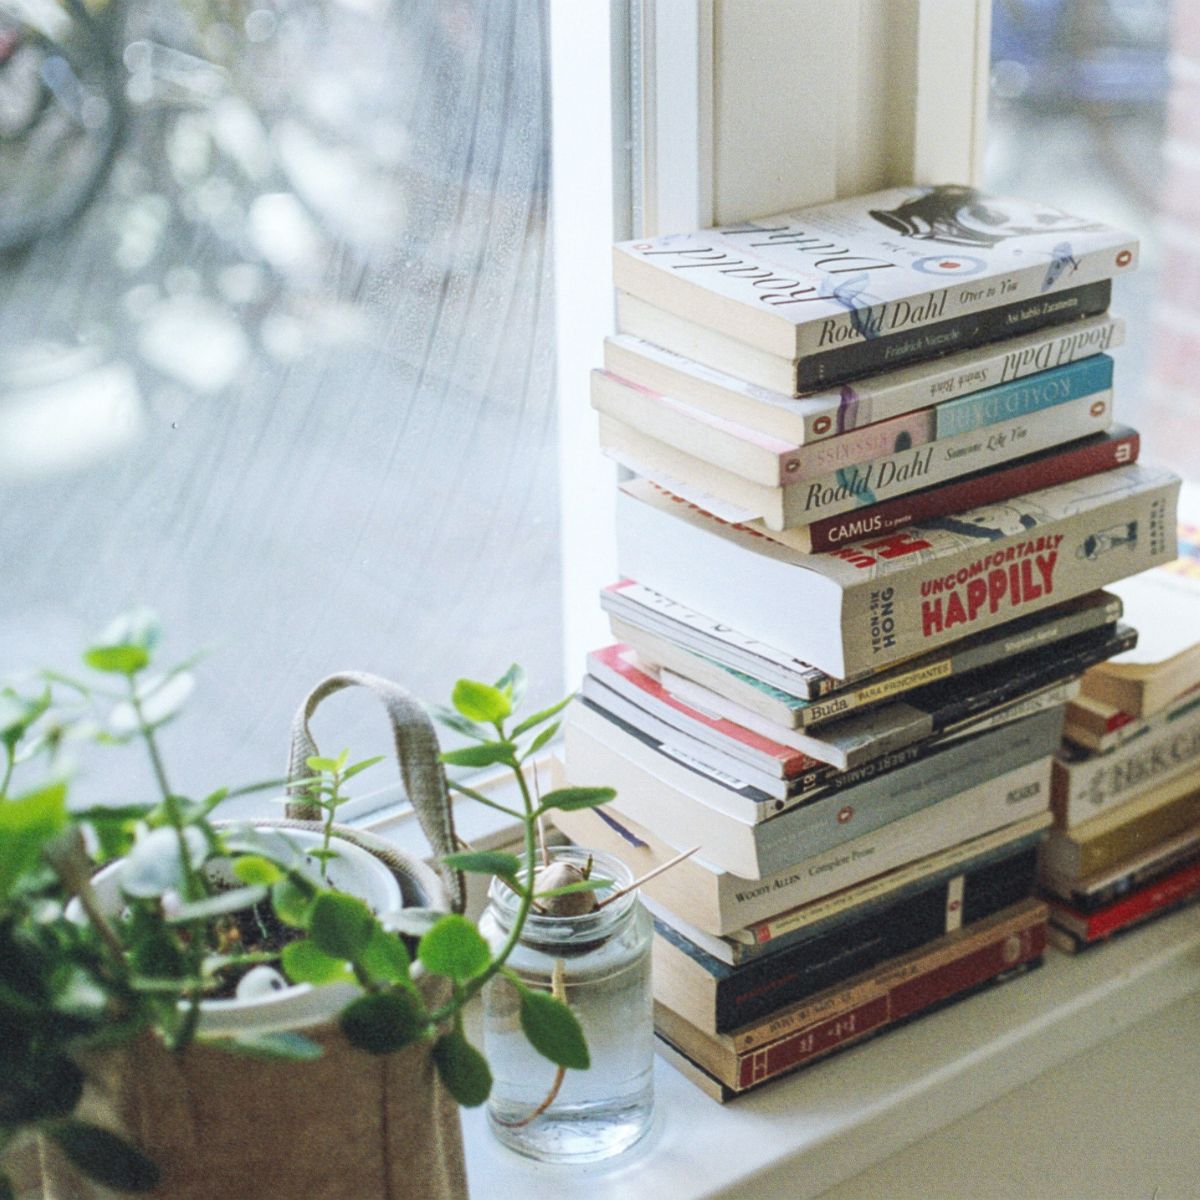 A book pile in a windowsill by a plant.